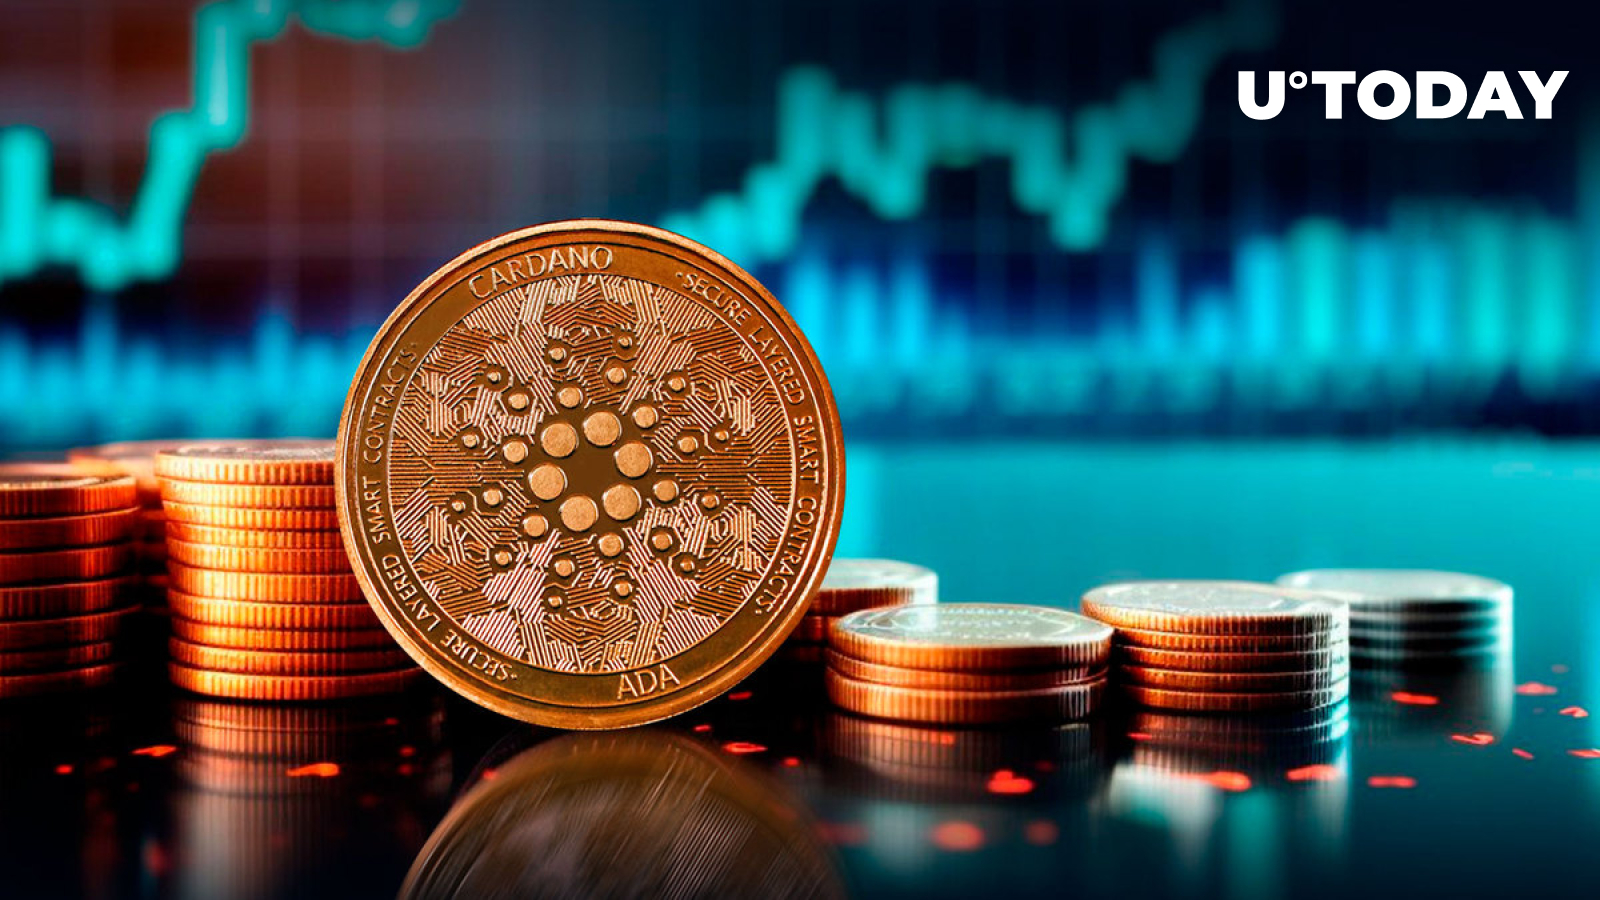 Cardano Soars 94% in Volume as ADA Price Reaches Crucial Point